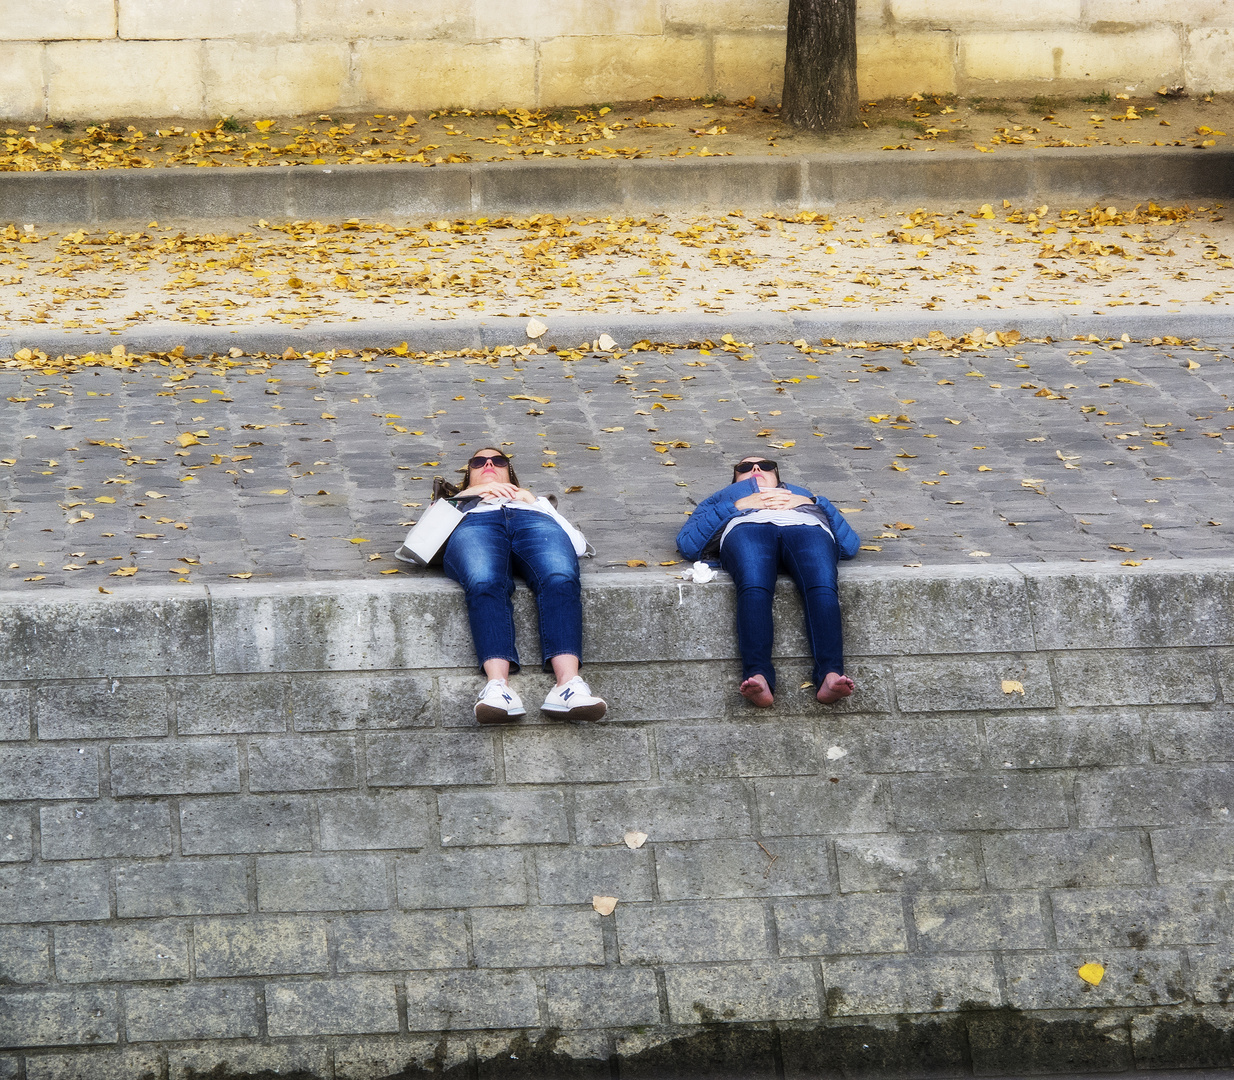 Sunbathing on the banks of the Seine.